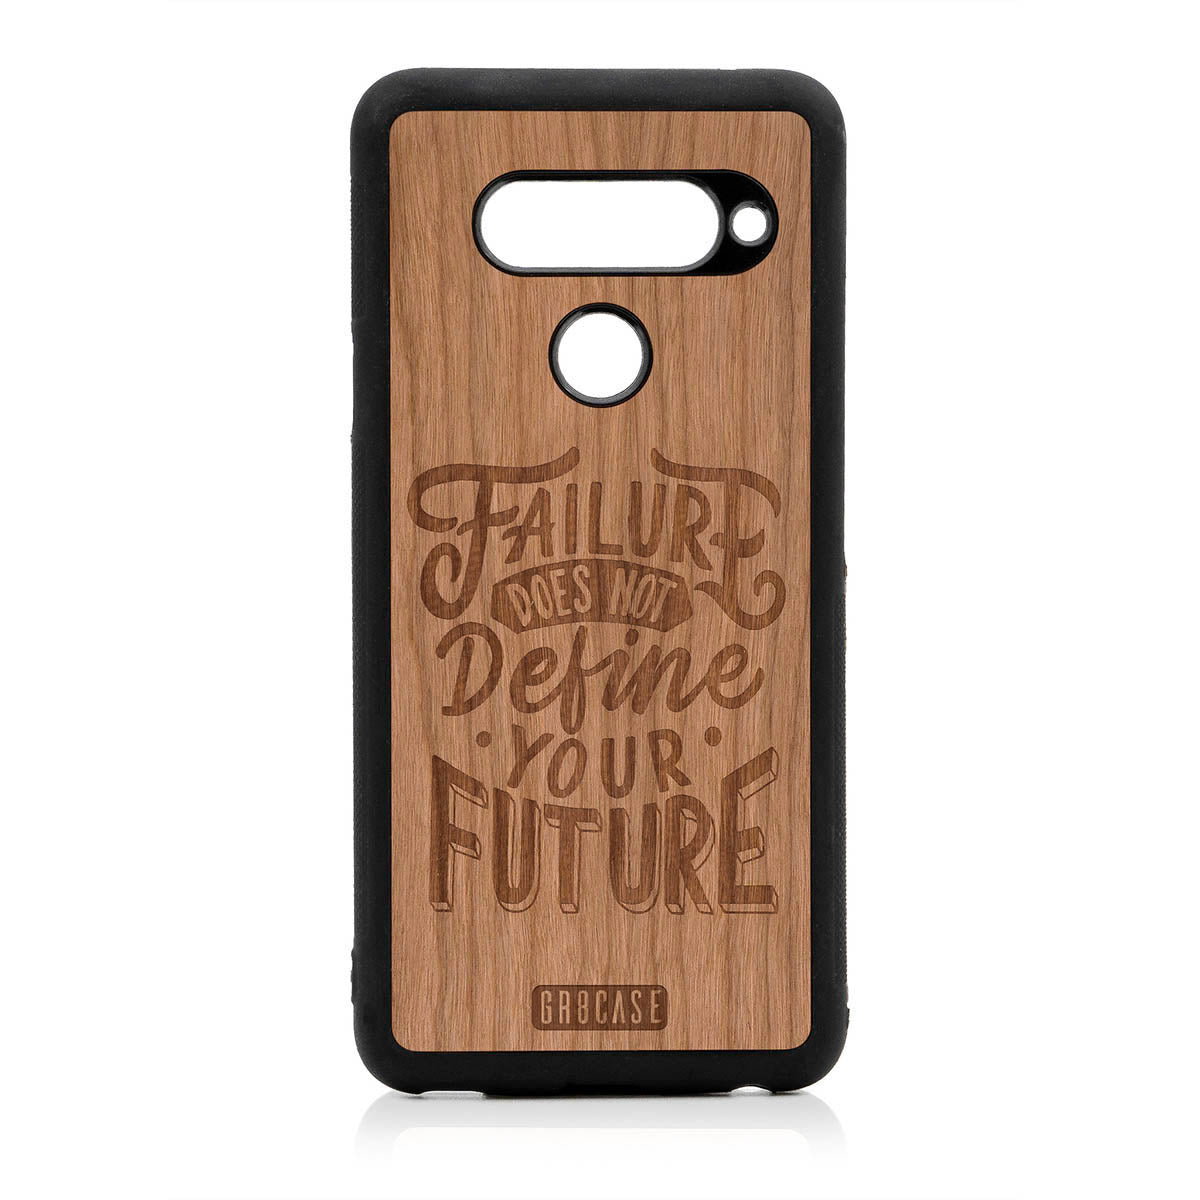 Failure Does Not Define You Future Design Wood Case For LG V40 by GR8CASE